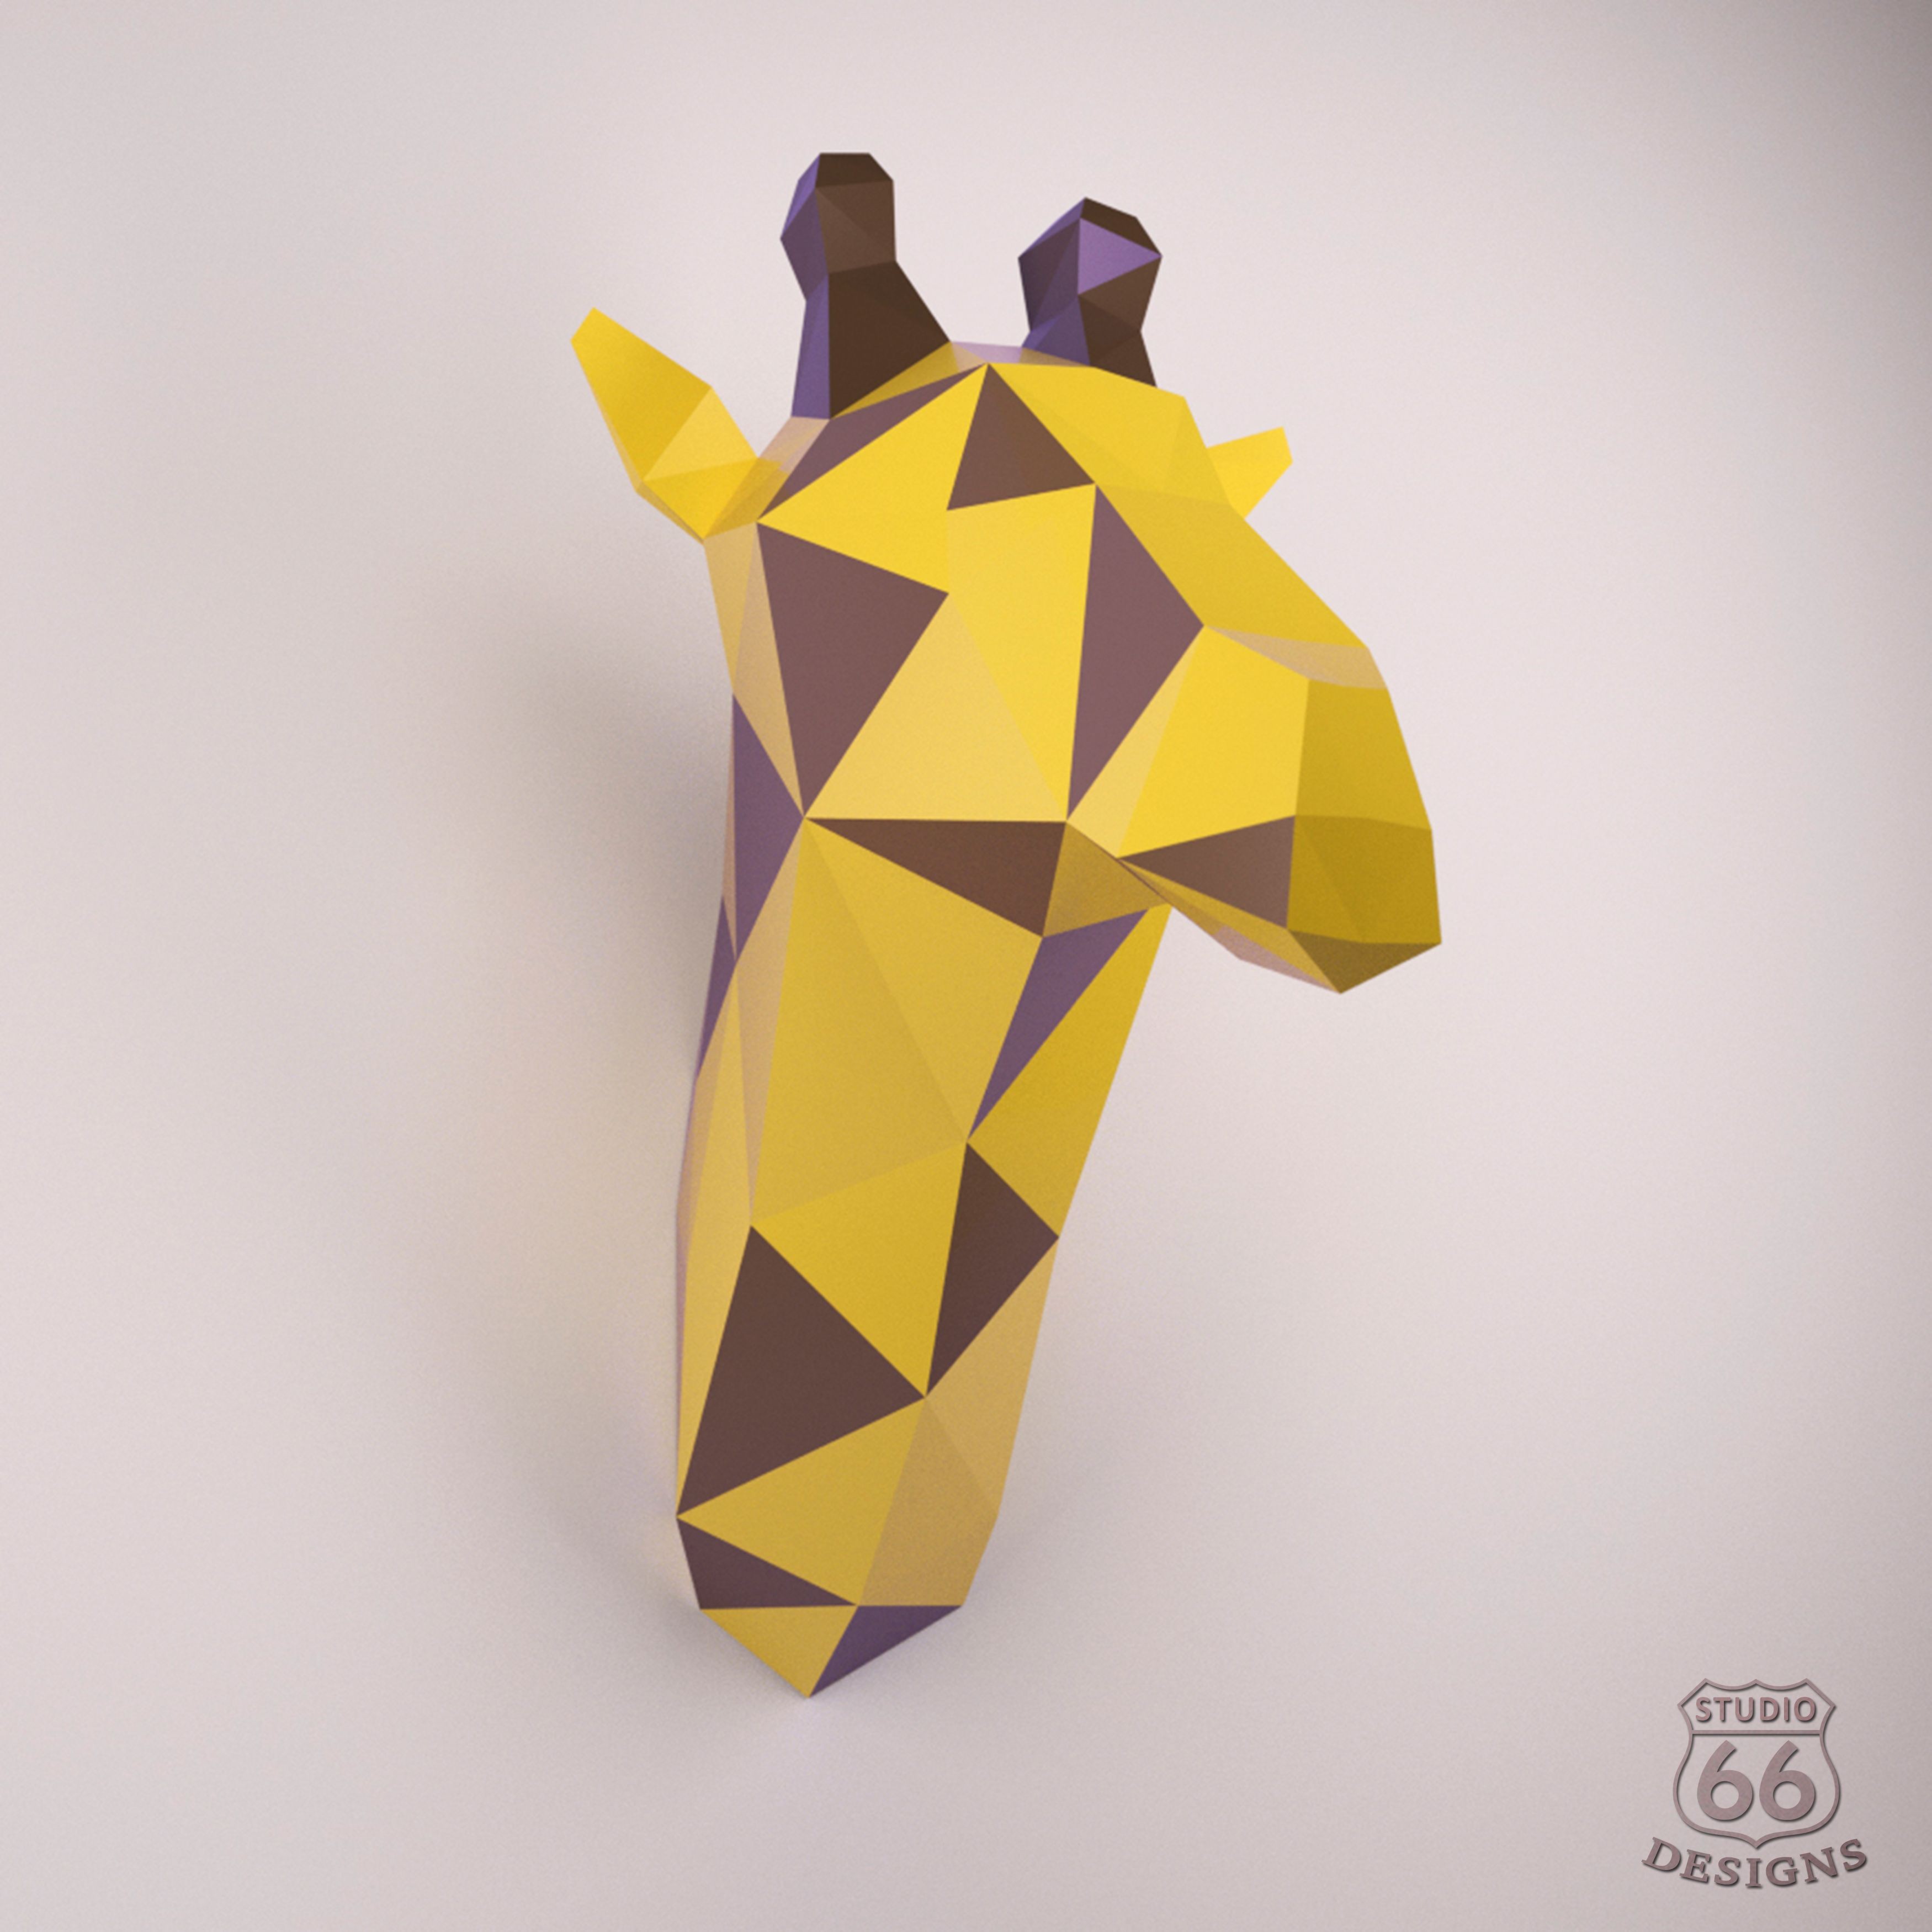 Giraffe Papercraft Make Your Own Low Poly Giraffe Head Trophy Price $10 This Listing